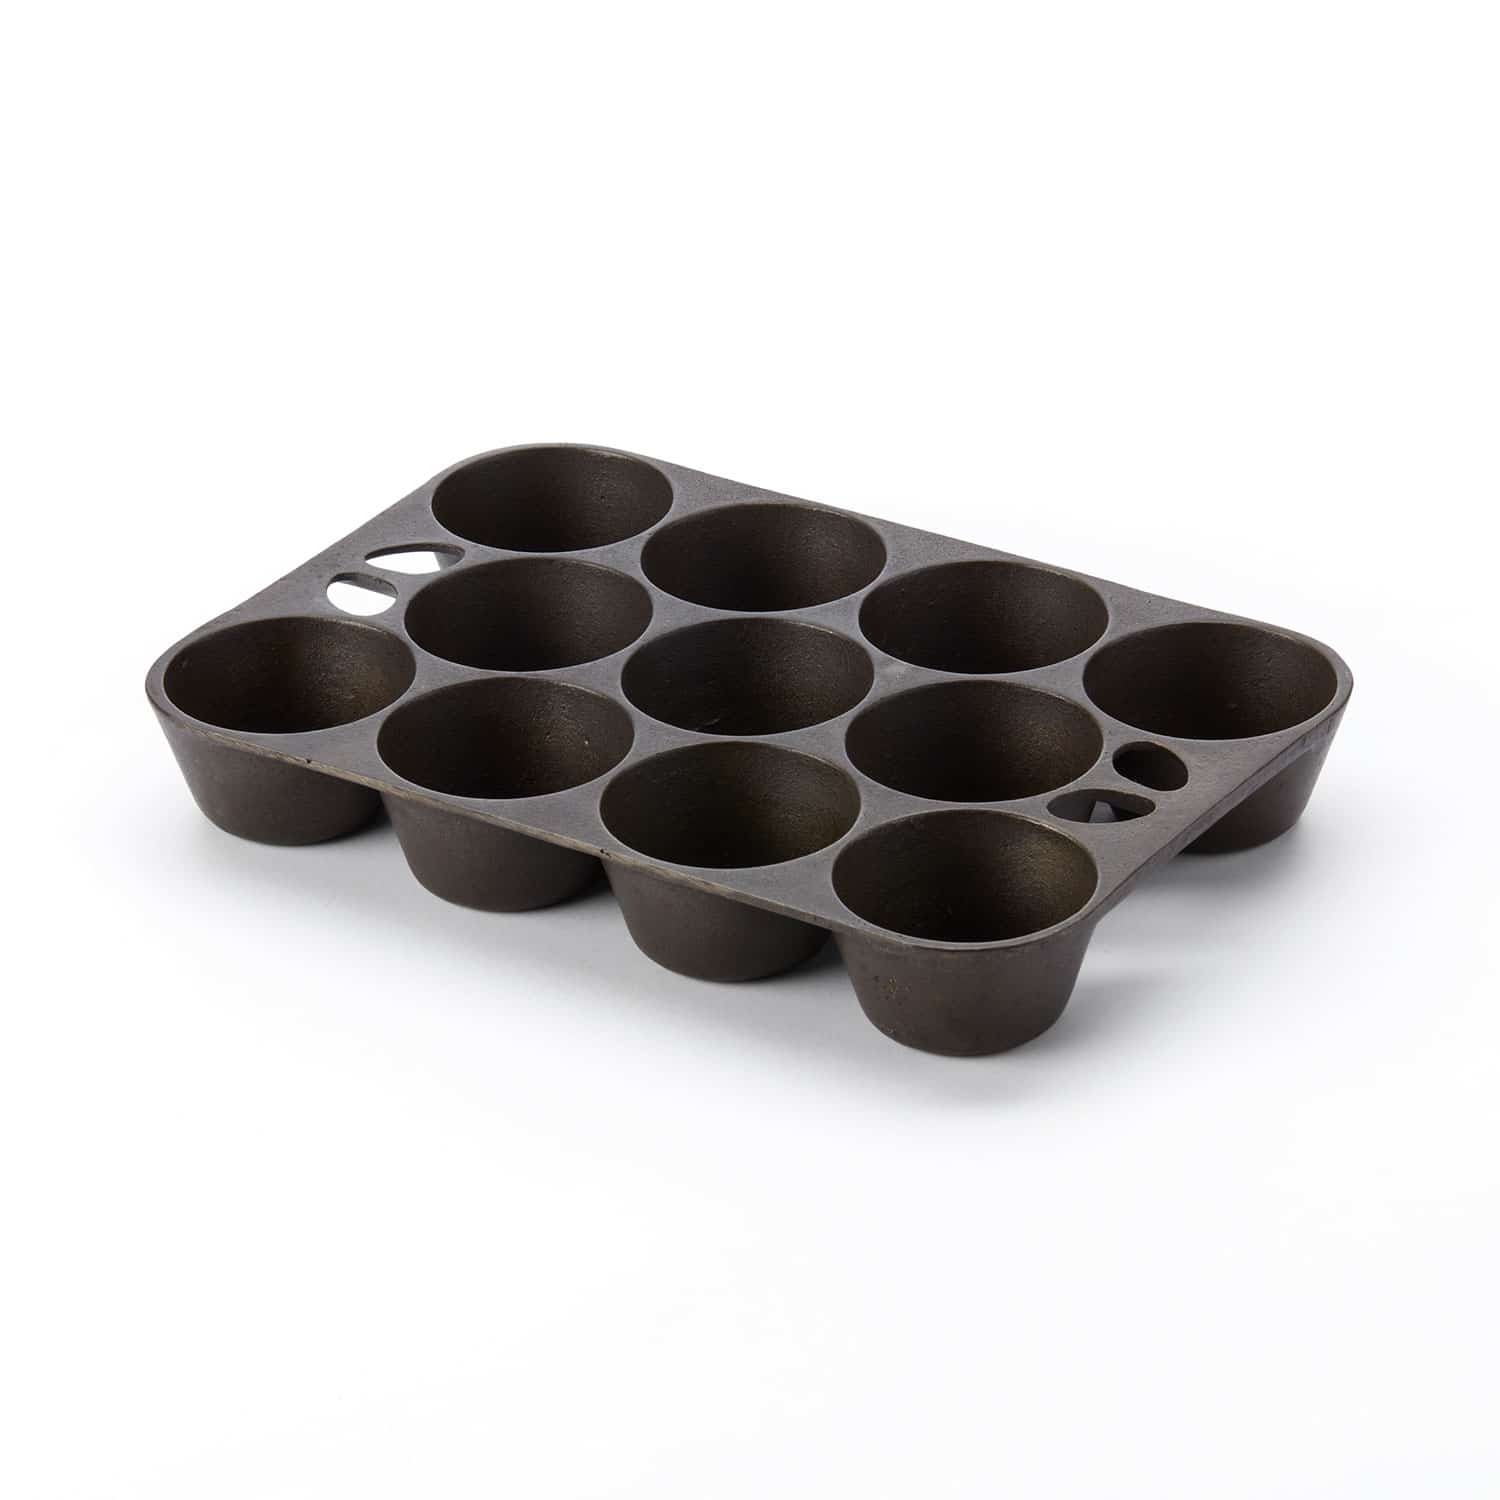 Cast Iron P (Vintage Muffin Pan)  Rental for Photography at Noho Surface  and Prop